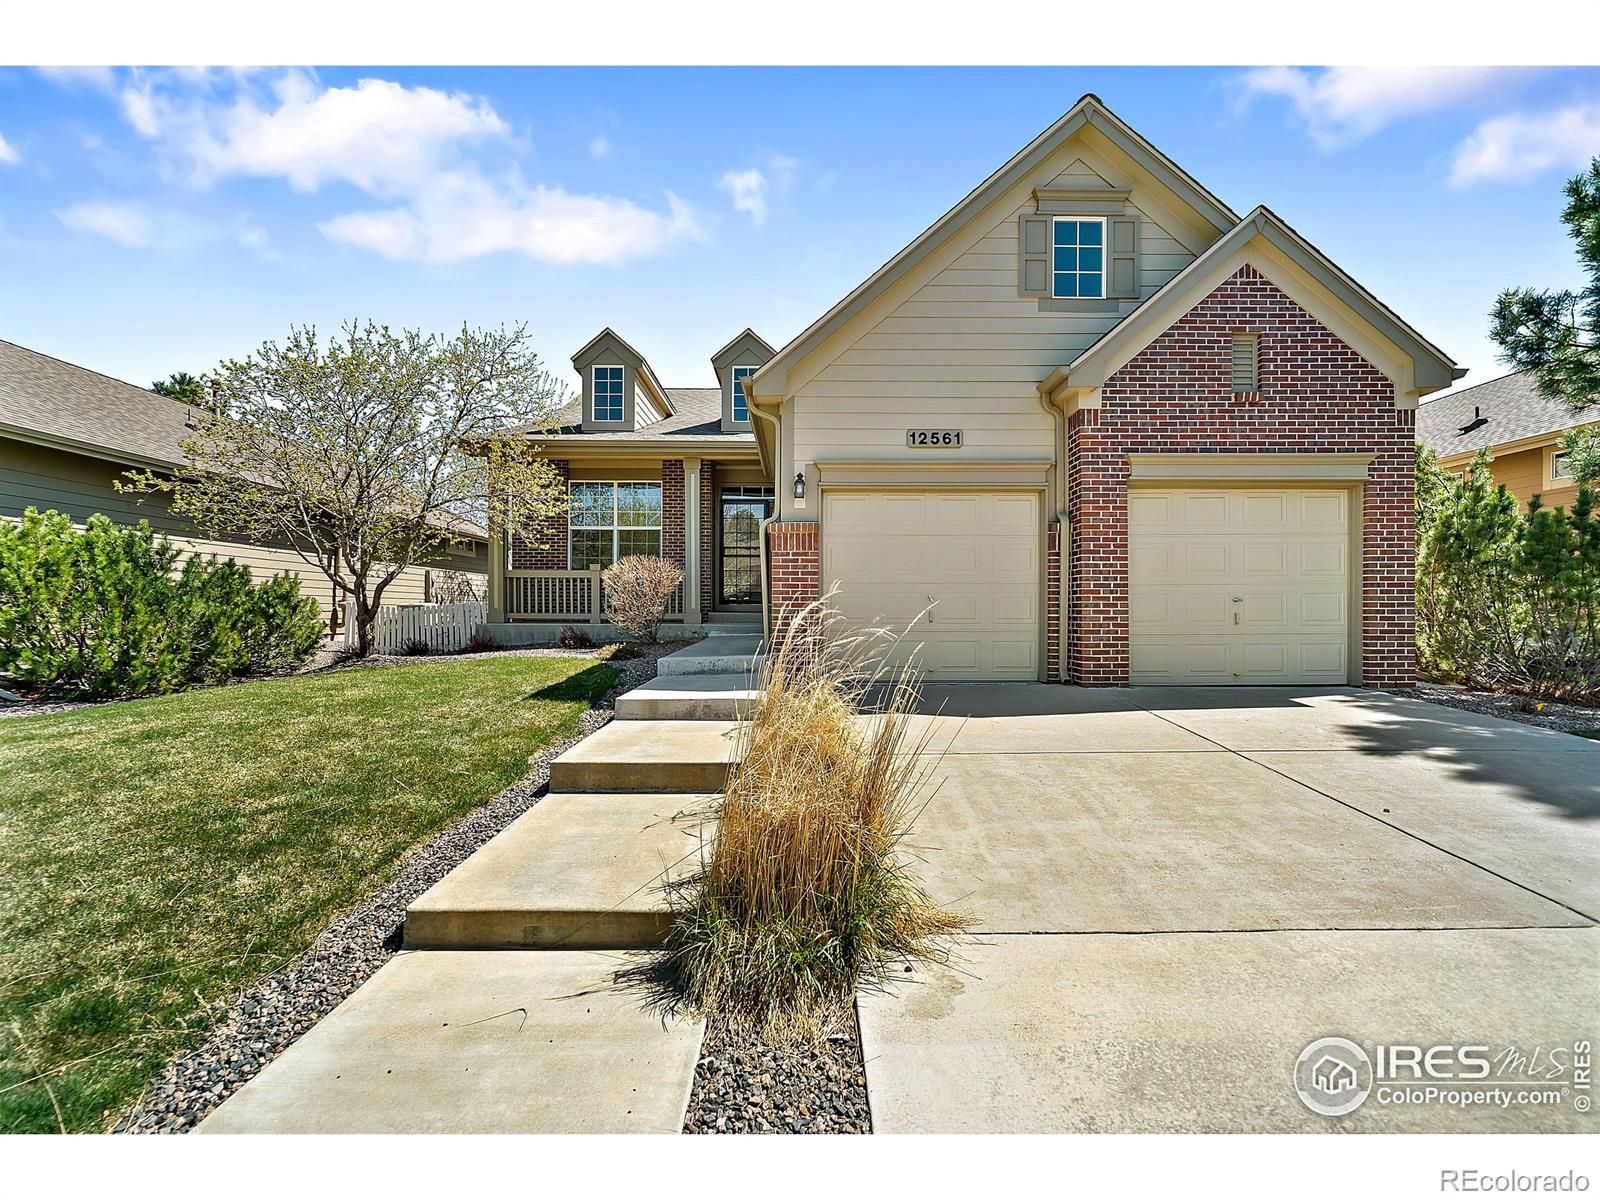 12561  grove street, broomfield sold home. Closed on 2024-05-07 for $662,000.